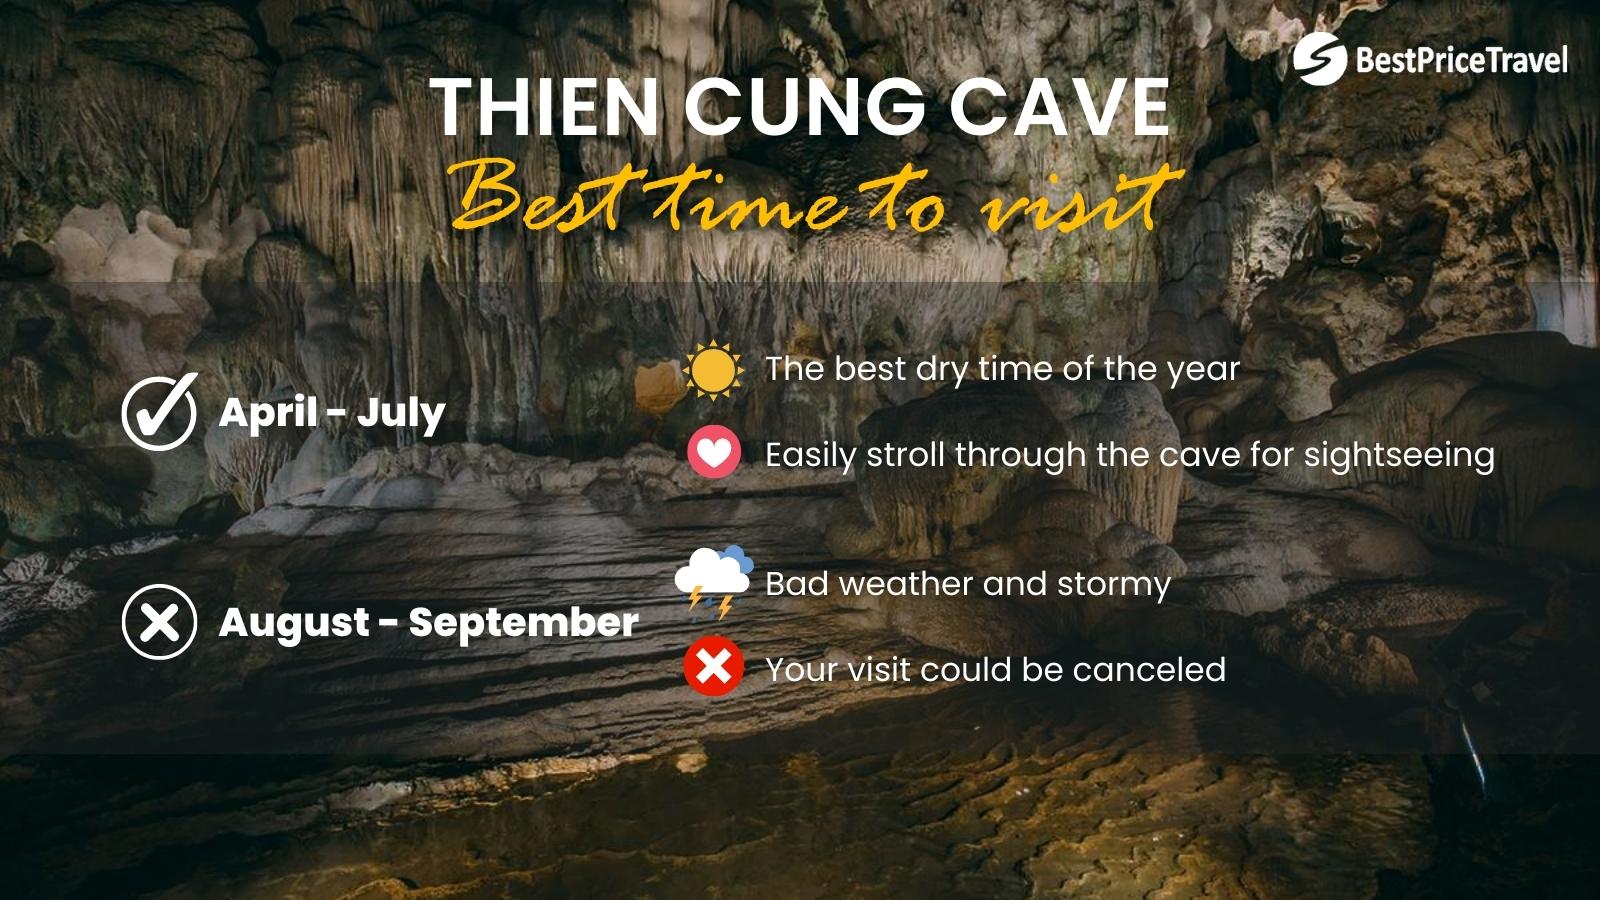 Best time to visit Thien Cung Cave